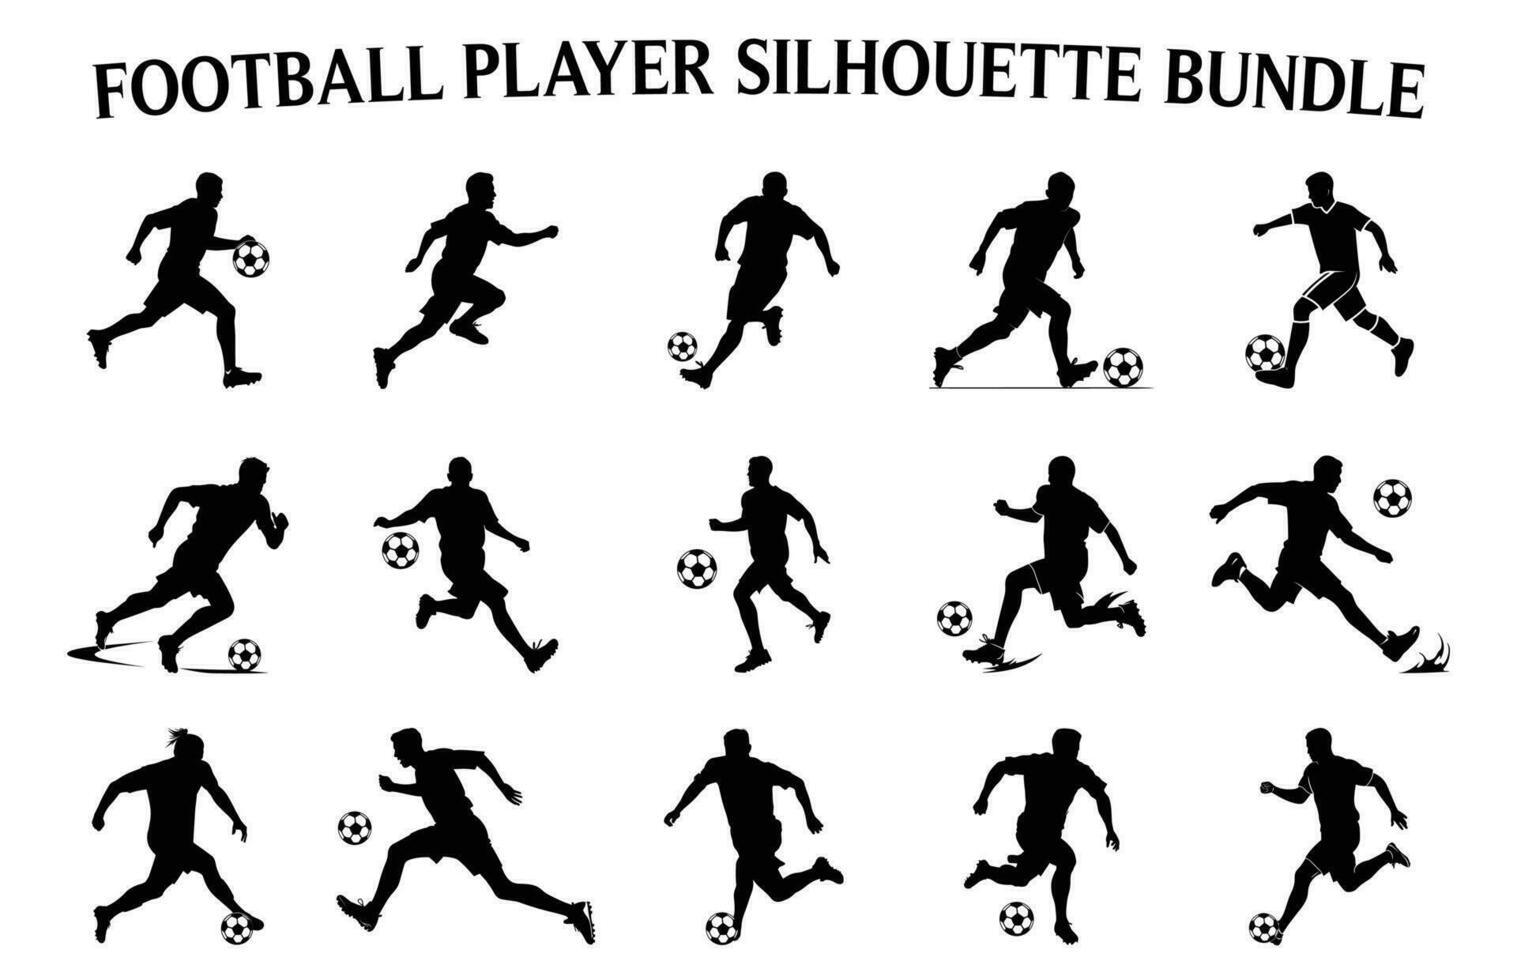 Soccer player silhouette Clipart Bundle, Set of black Silhouettes of Football Players in different poses  isolated on a white background vector